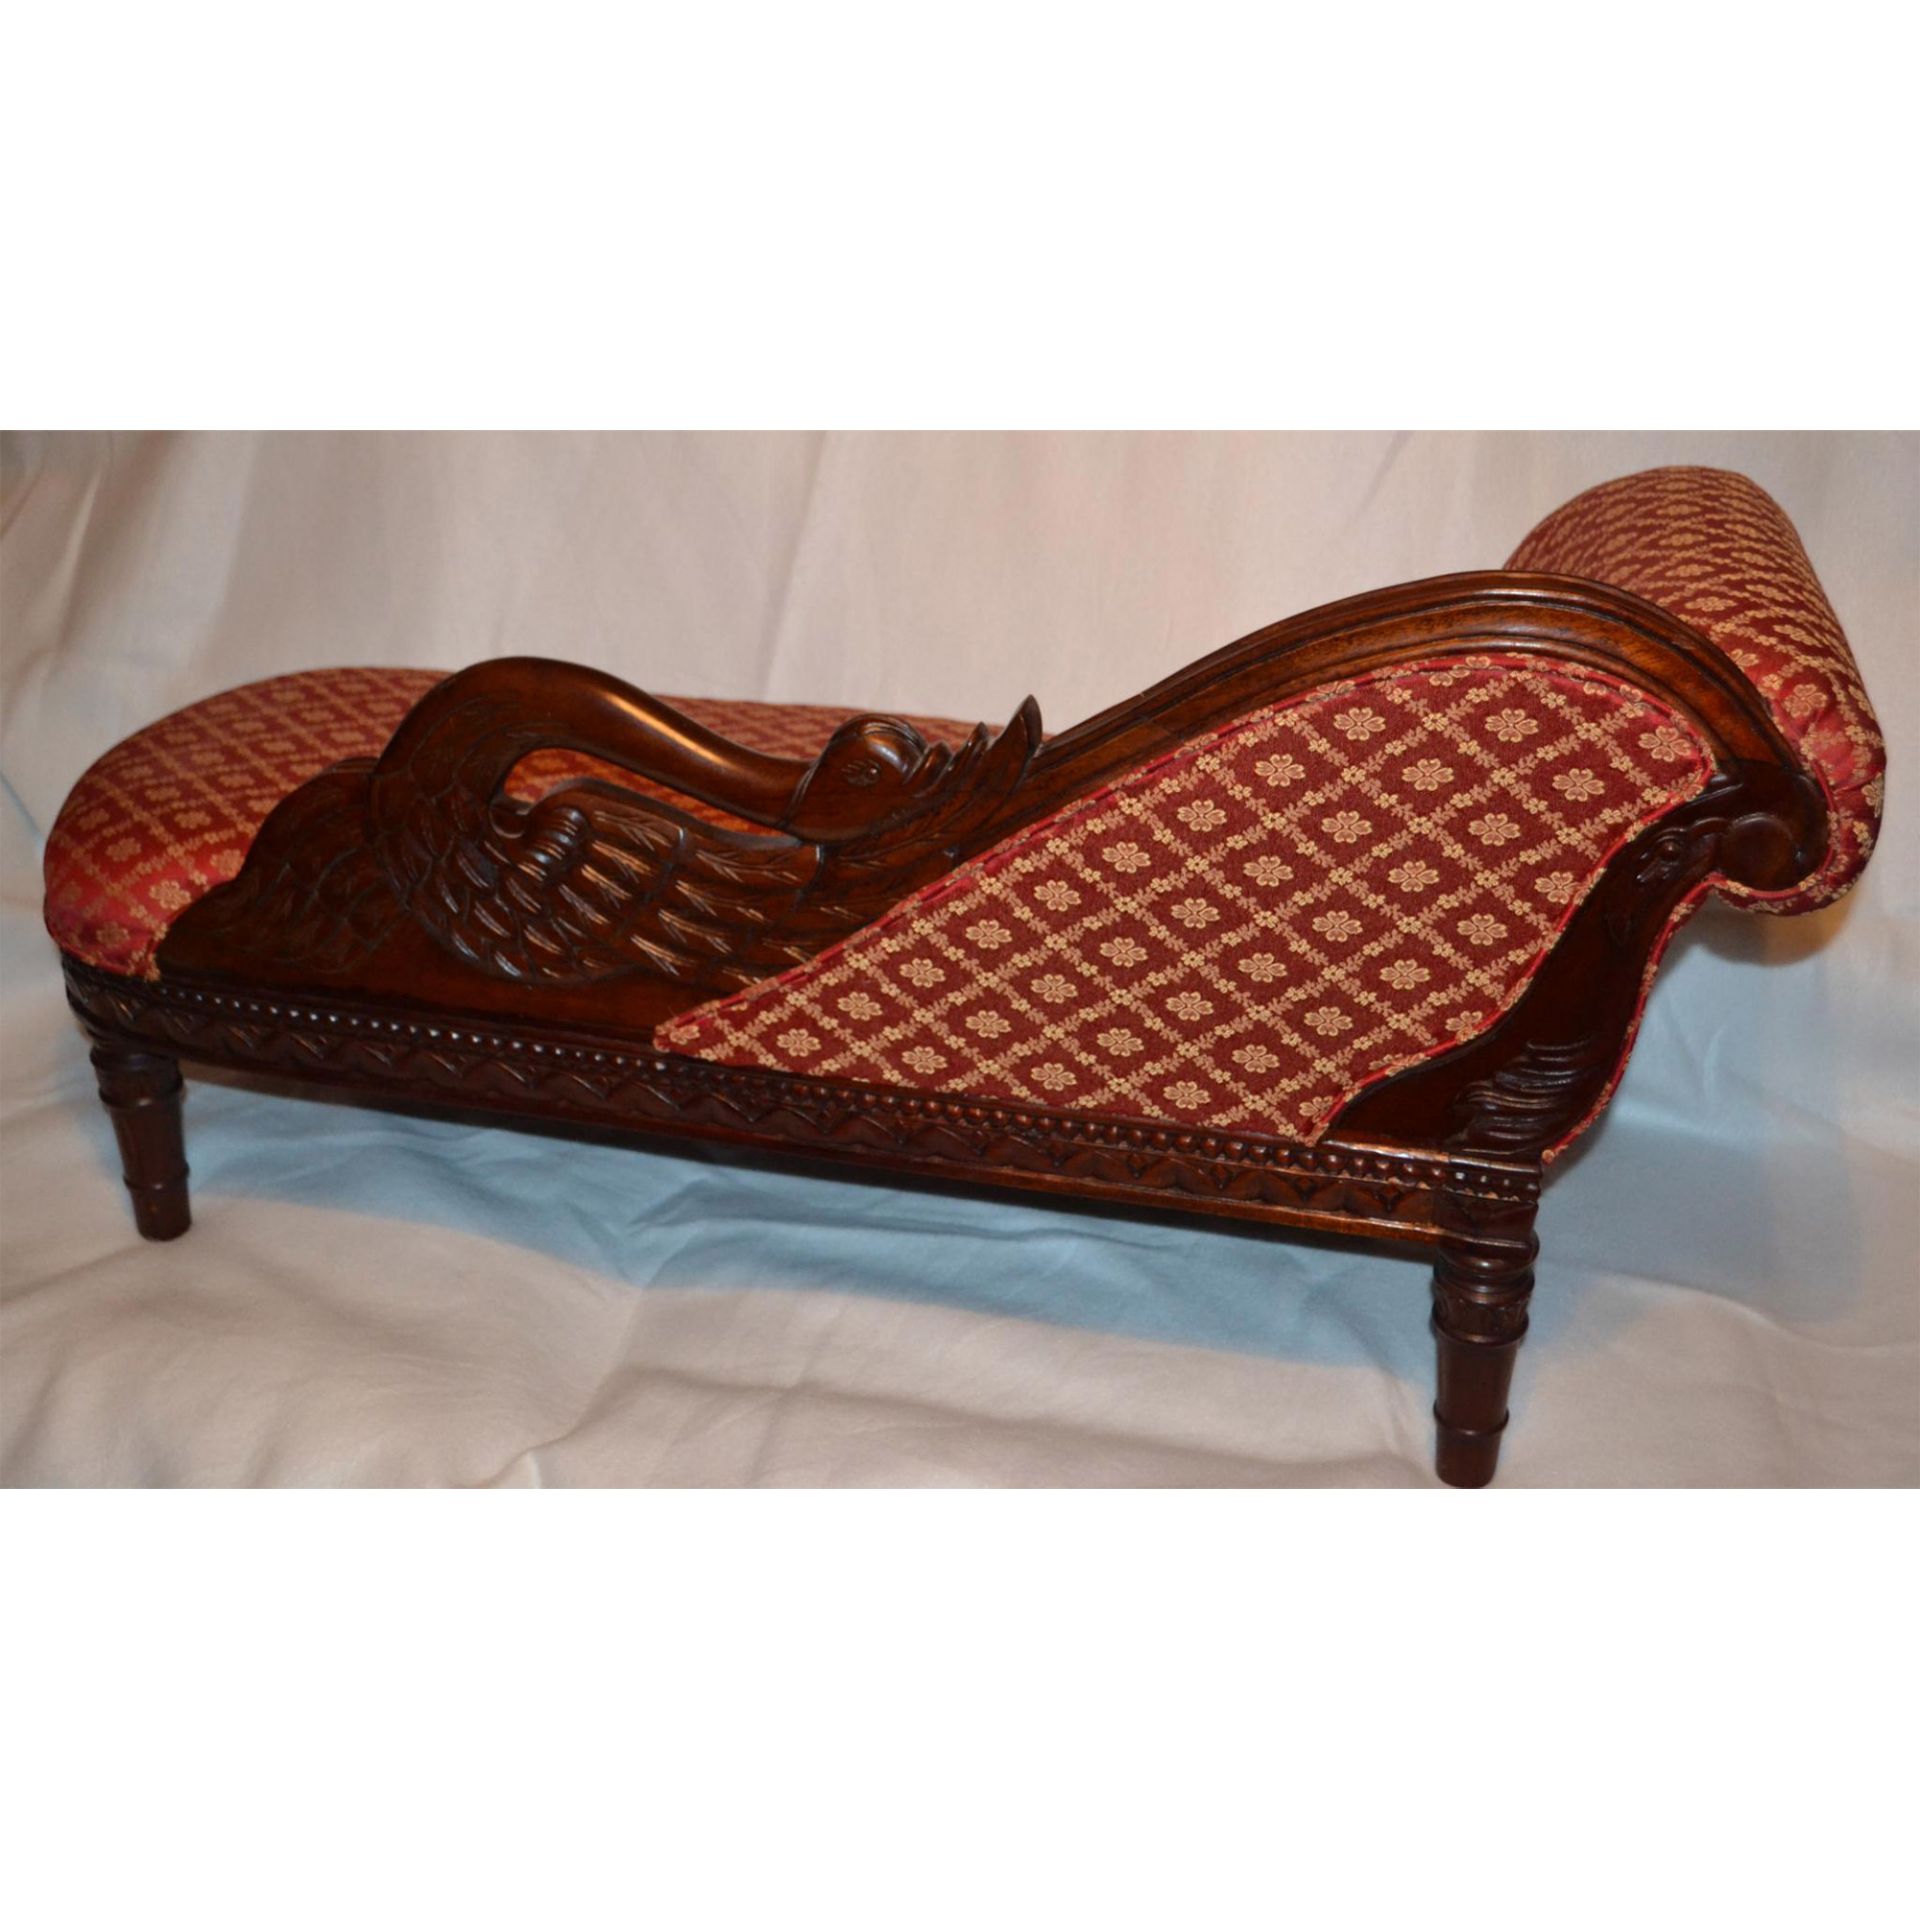 Miniature European Mahogany Hand Carved And Crafted Swan Sofa, Upholstered In Red/Gold Pattern Damas - Image 2 of 5